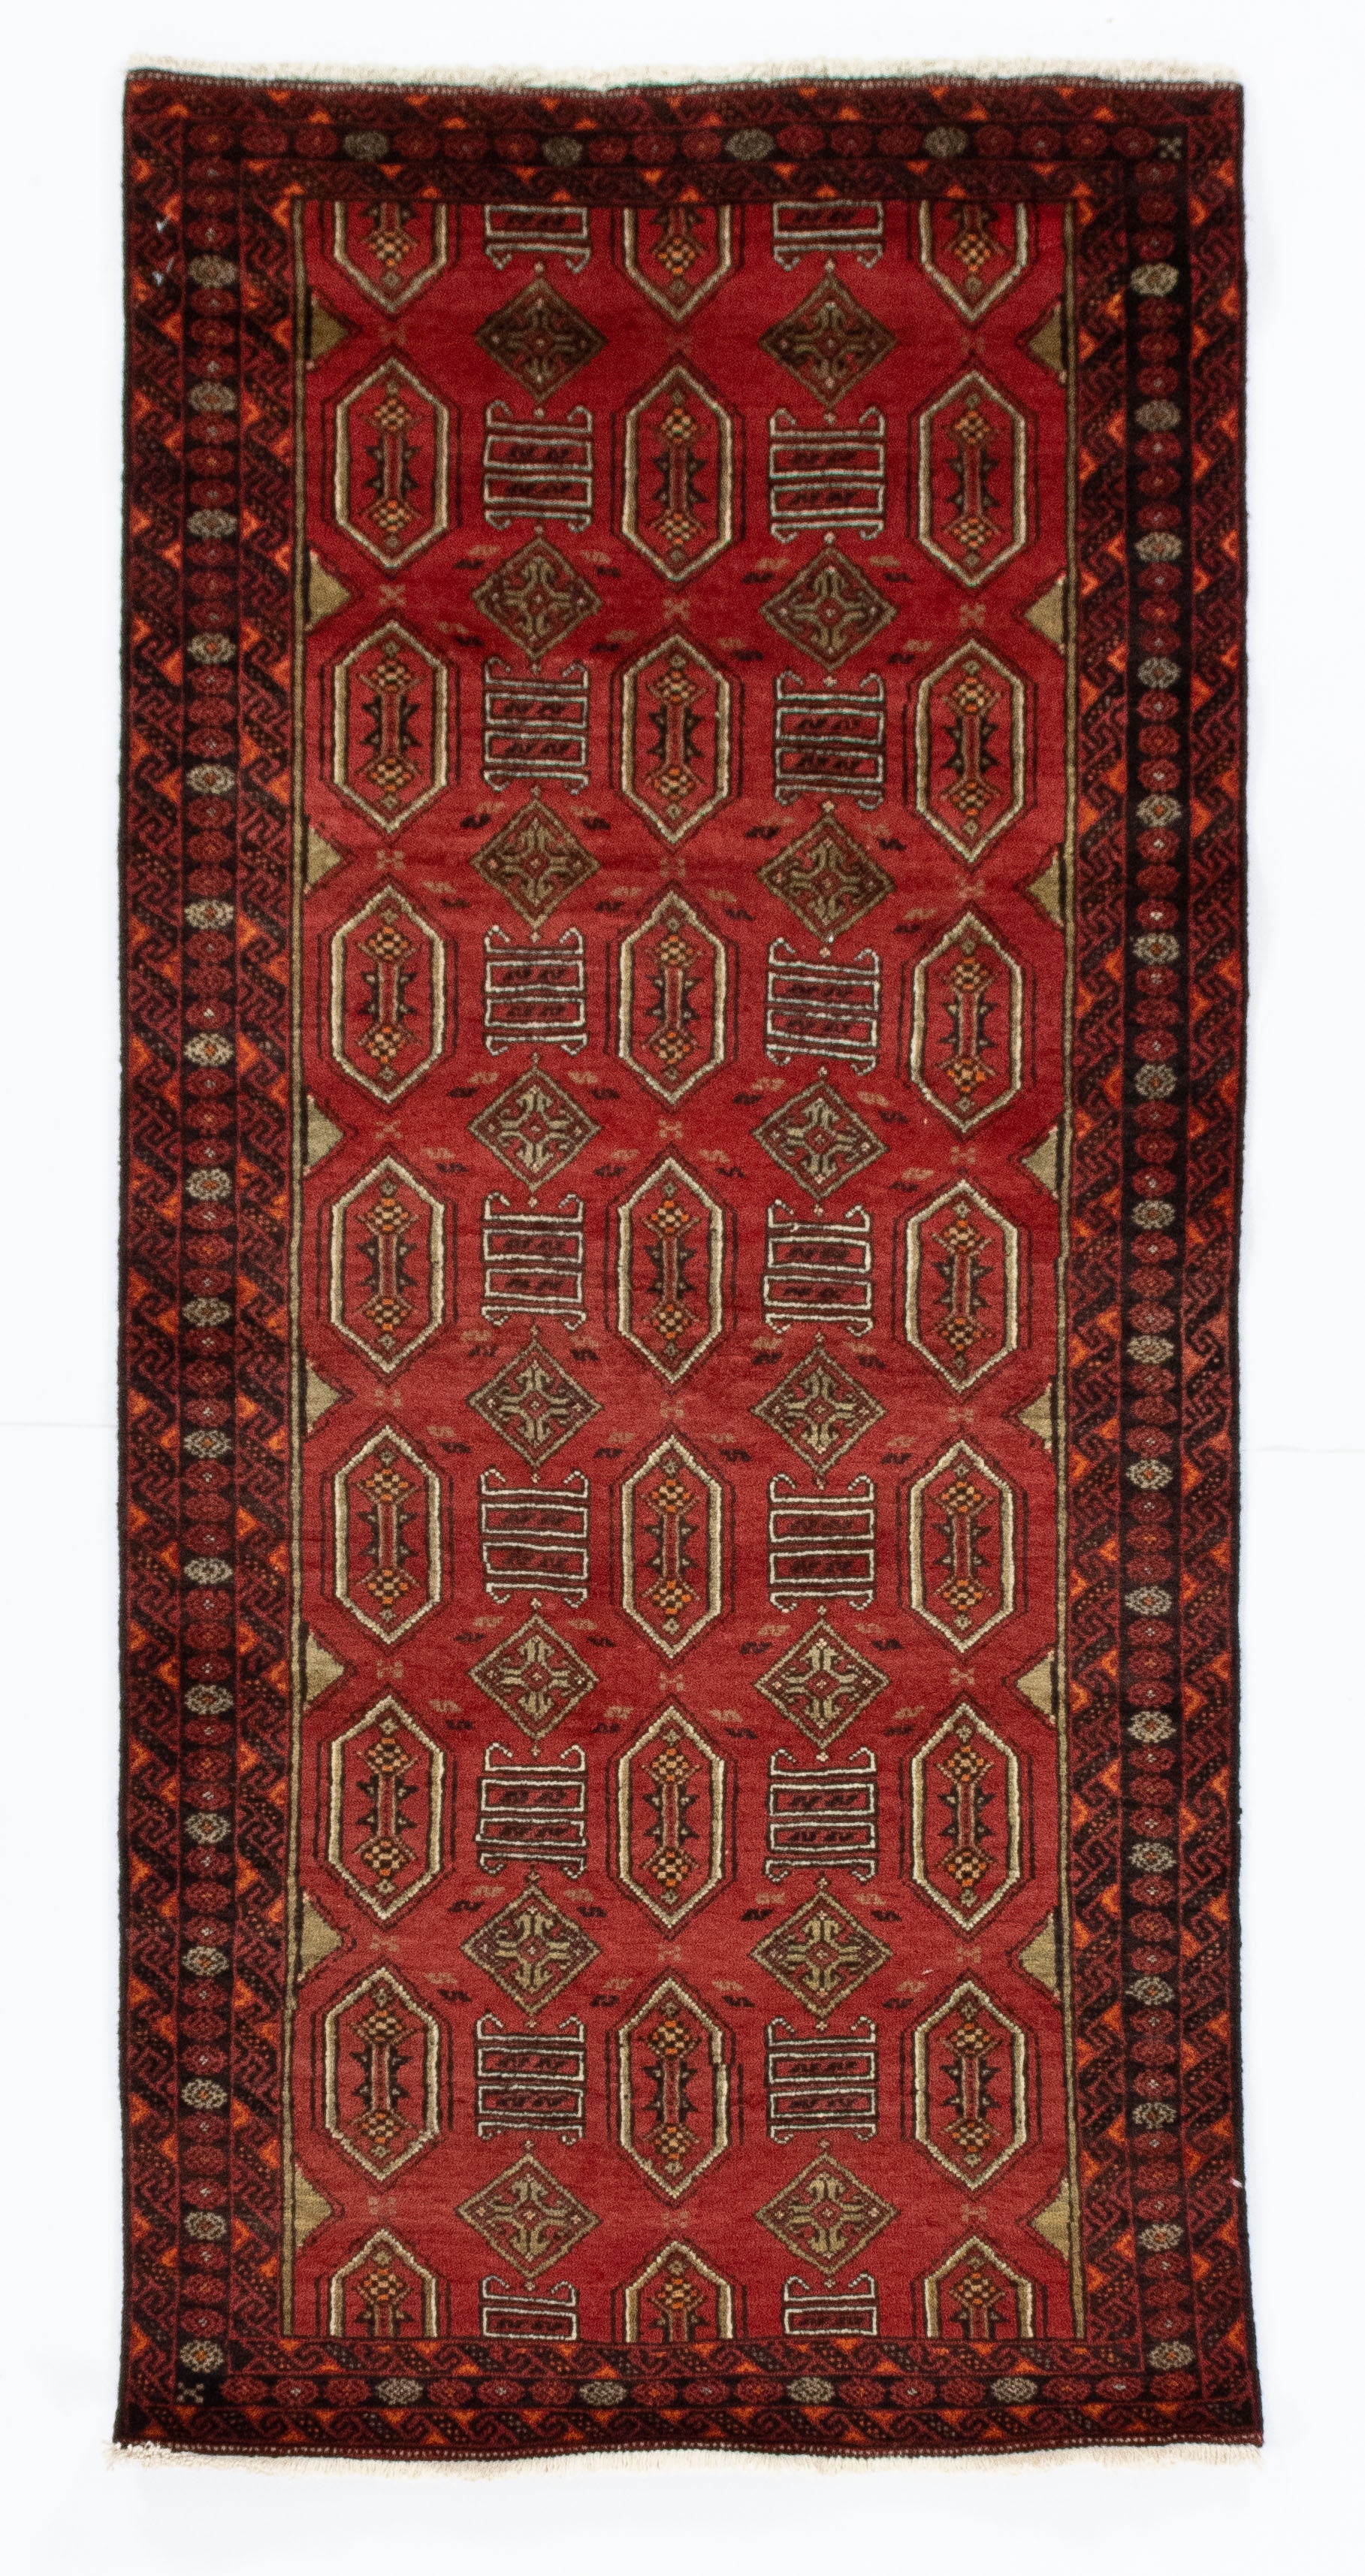 New Persian Balouch Rug <br> 3' 3 x 6' 10